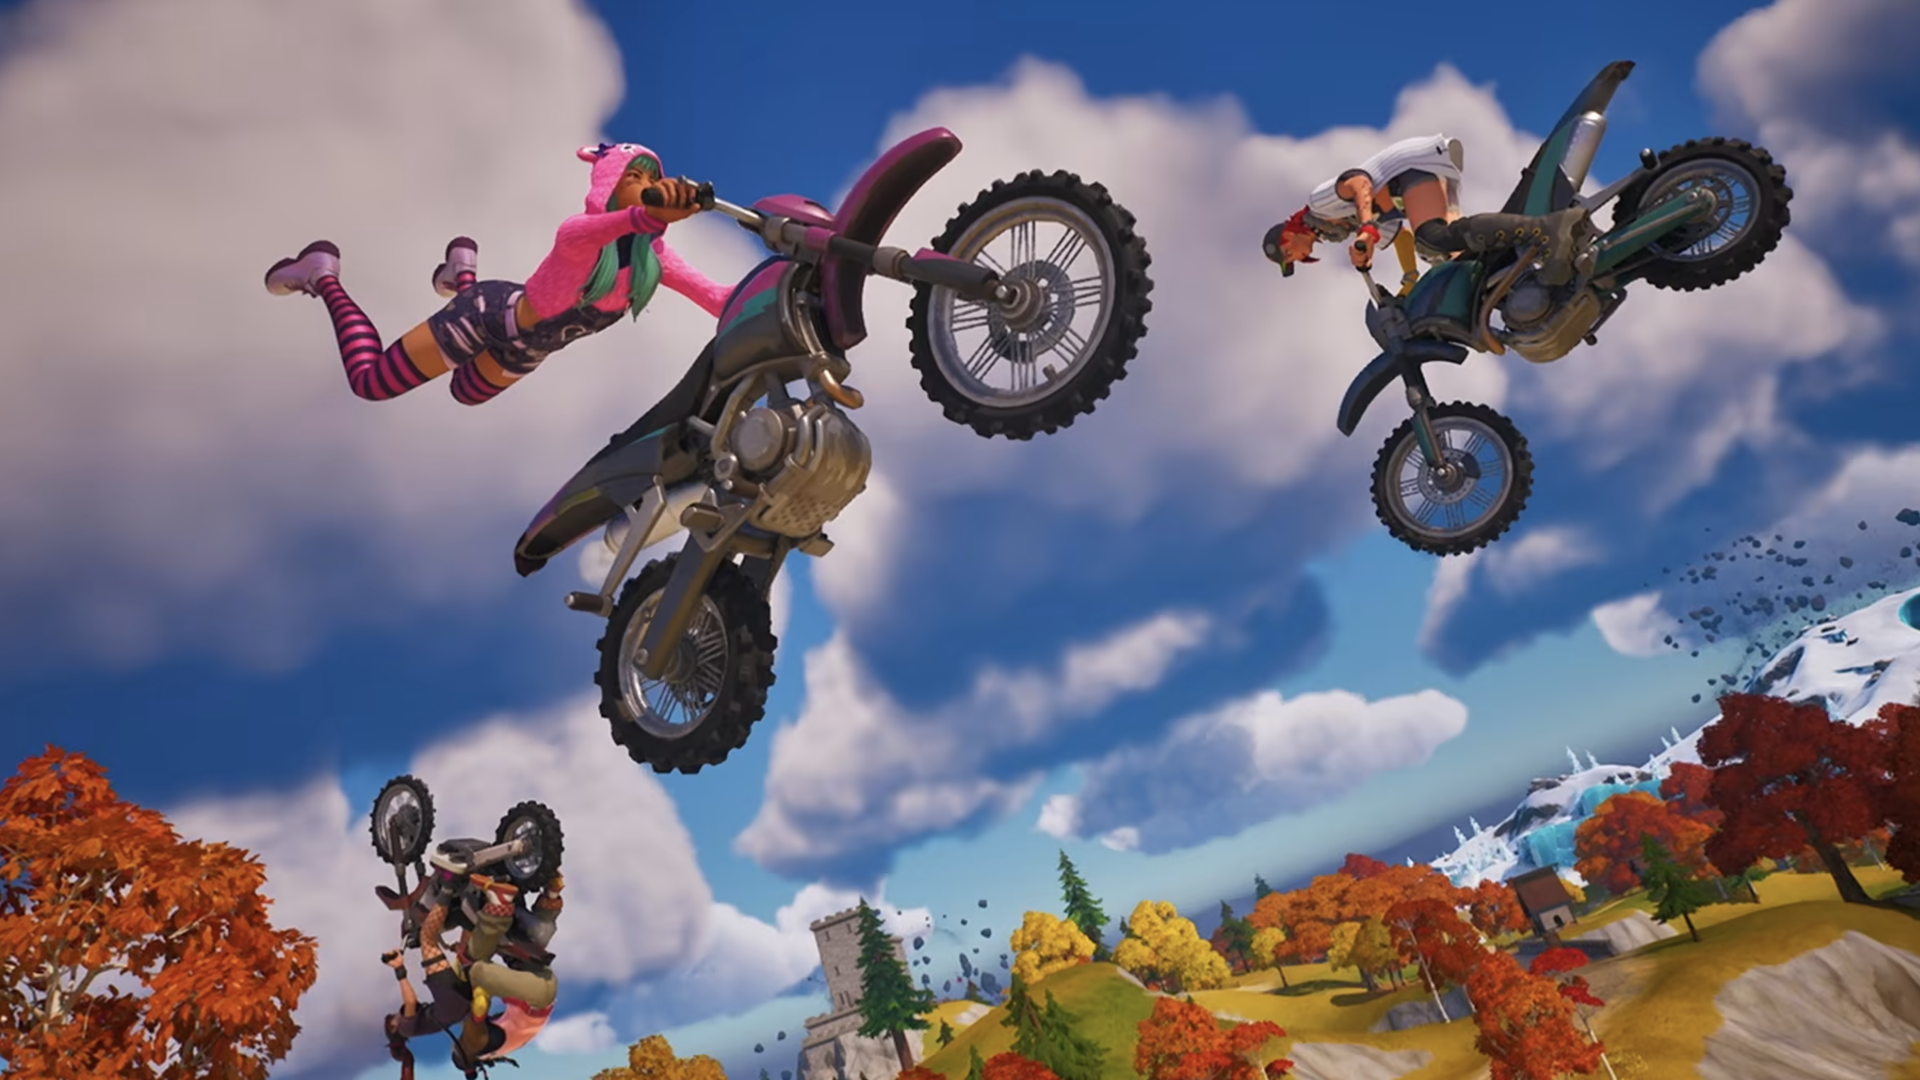 Screenshot of Fortnite game with players on motorbikes